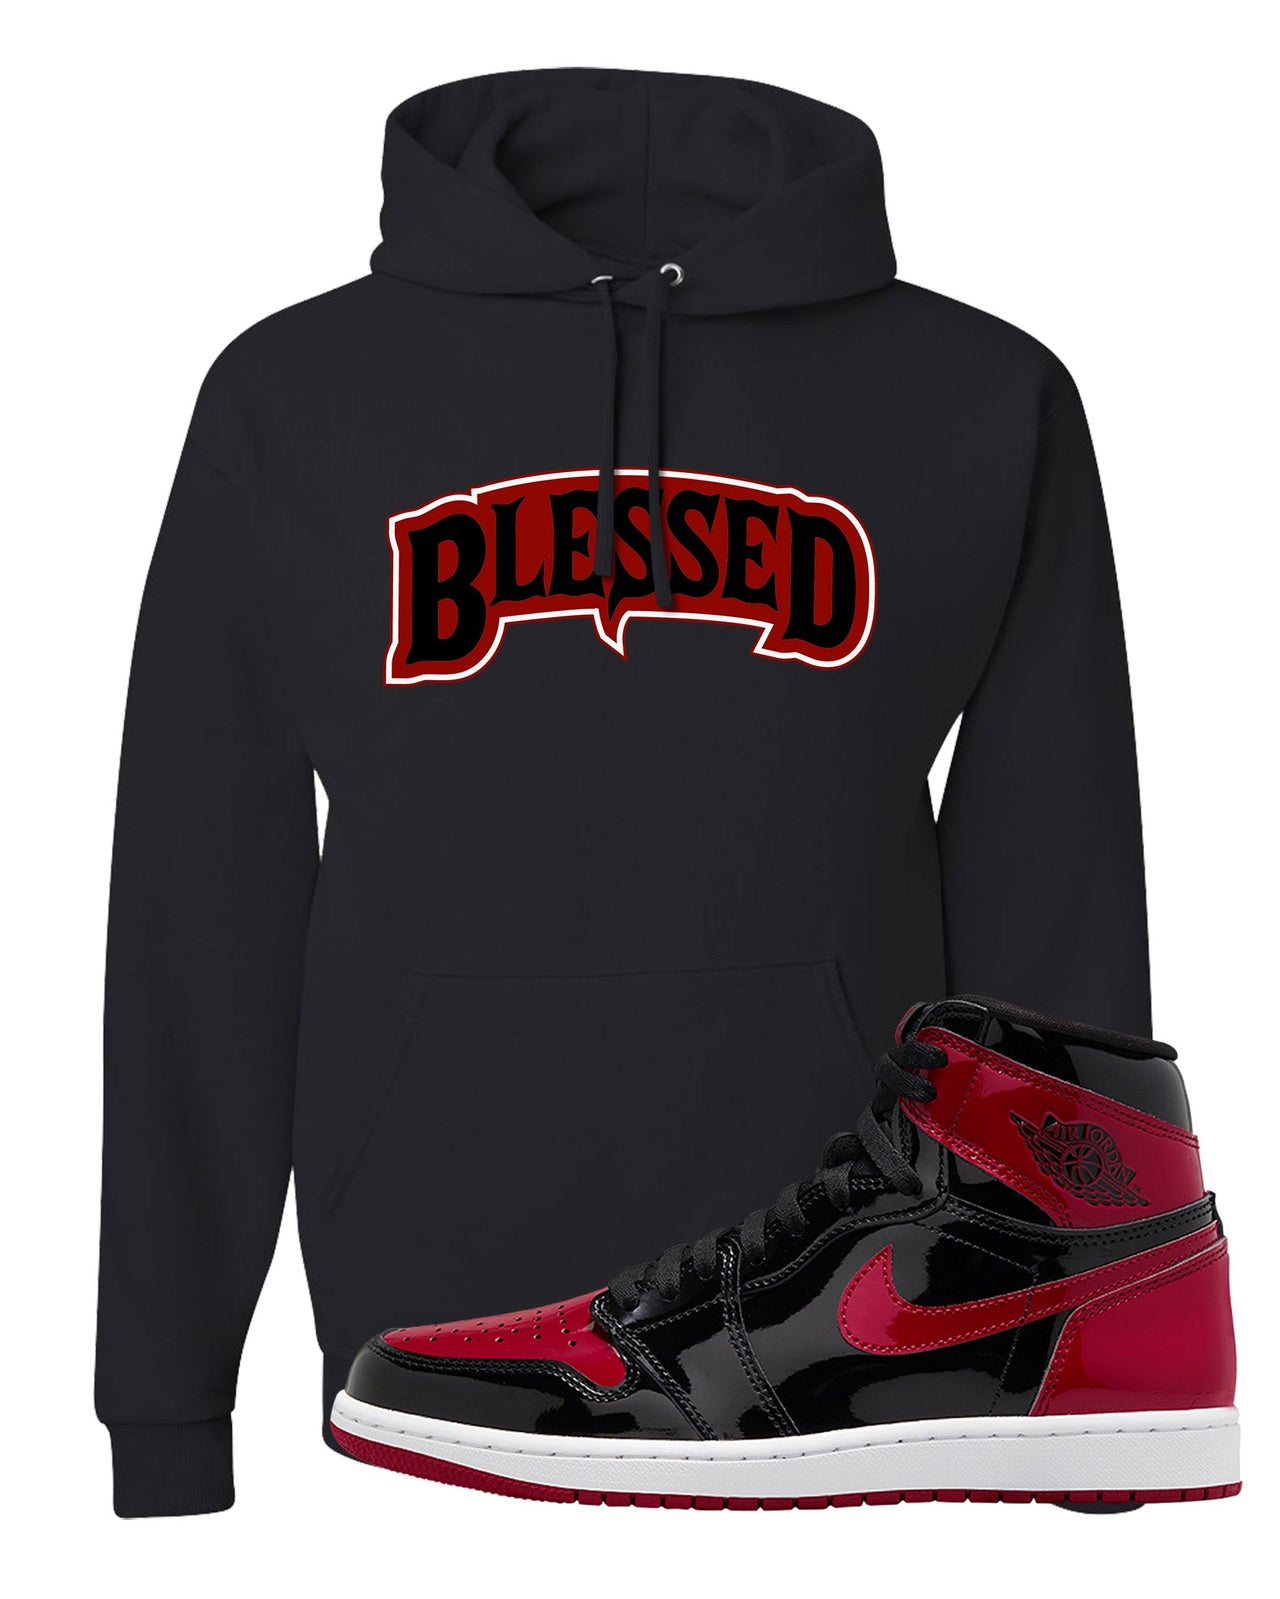 Patent Bred 1s Hoodie | Blessed Arch, Black